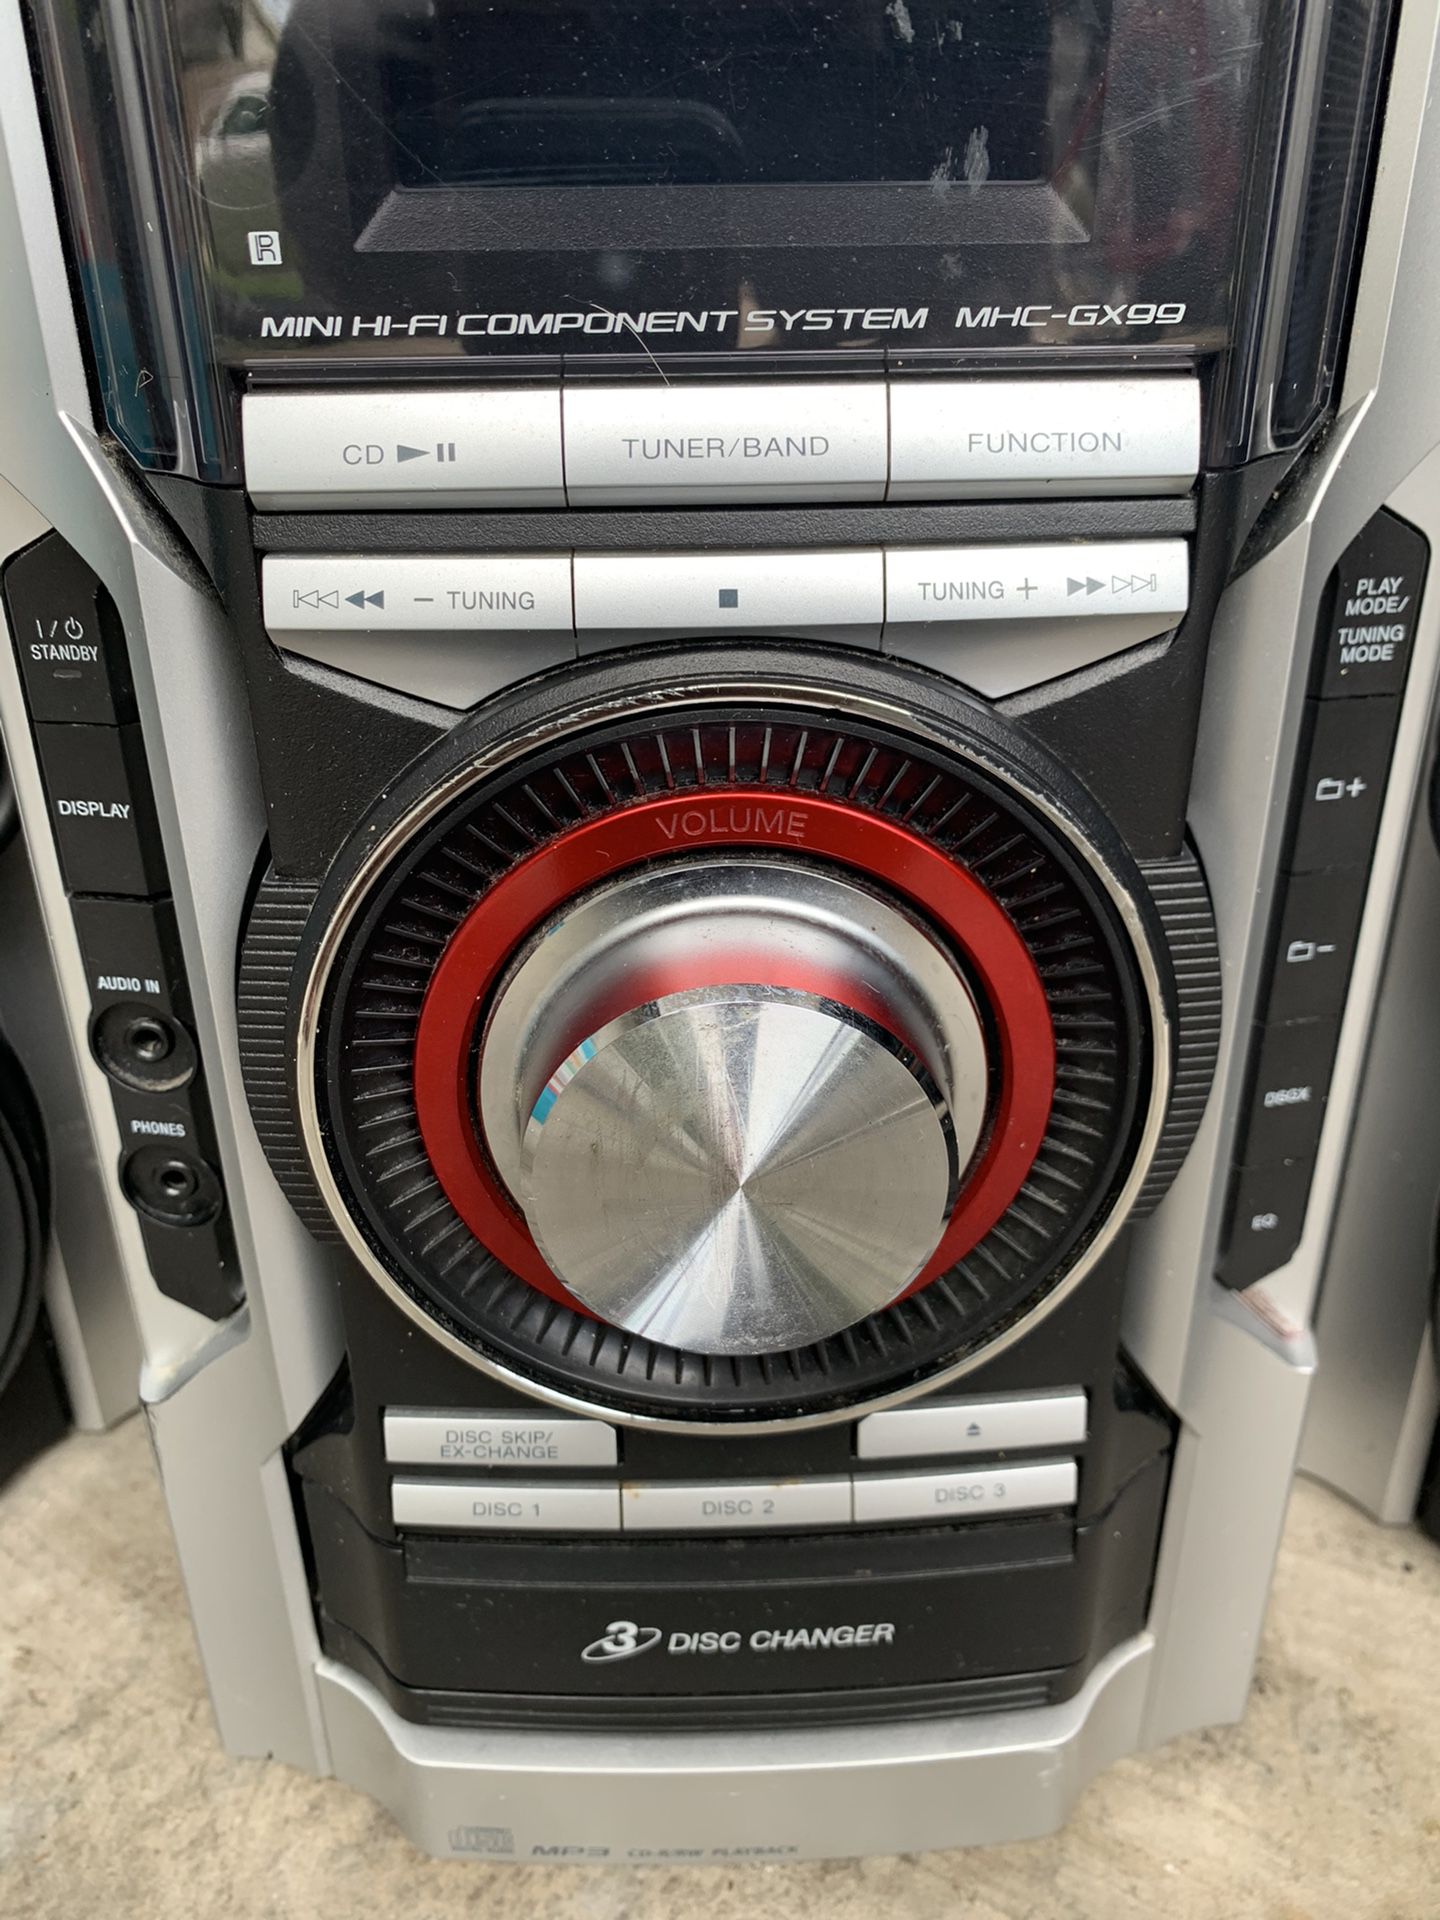 Sony Stereo 3 Disc changer